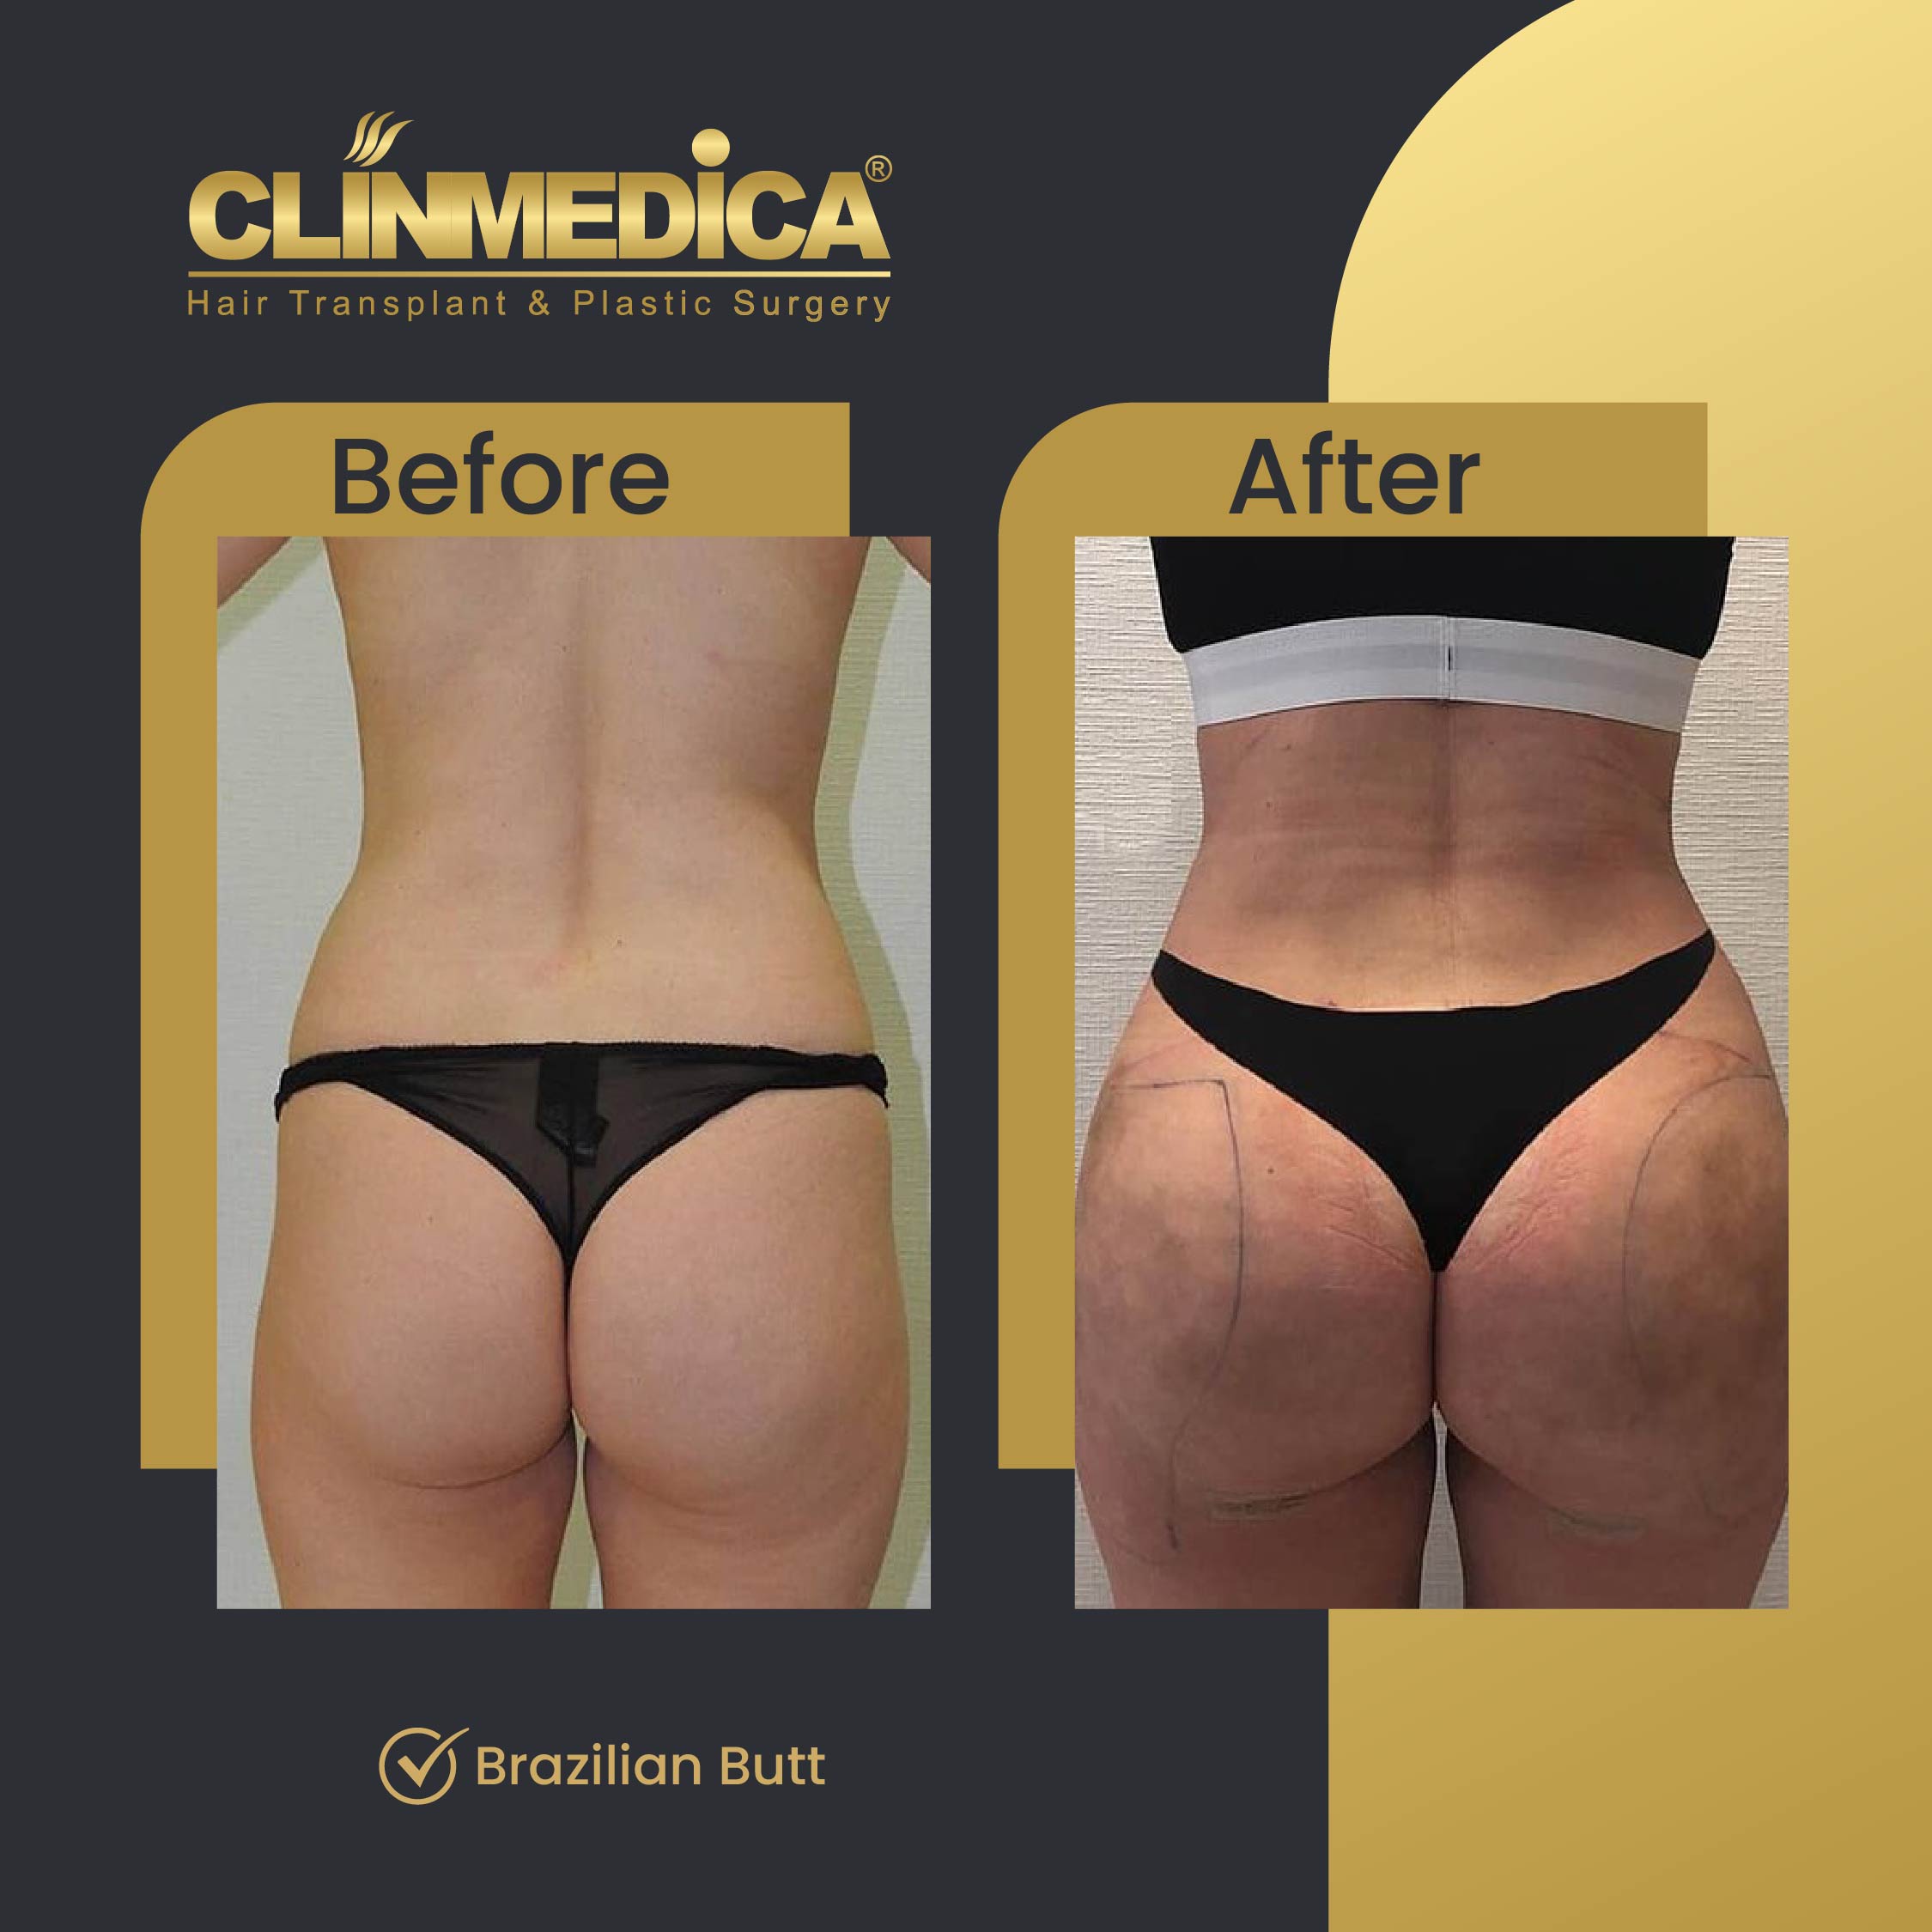 Brazilian Butt surgery in Turkey - before and after